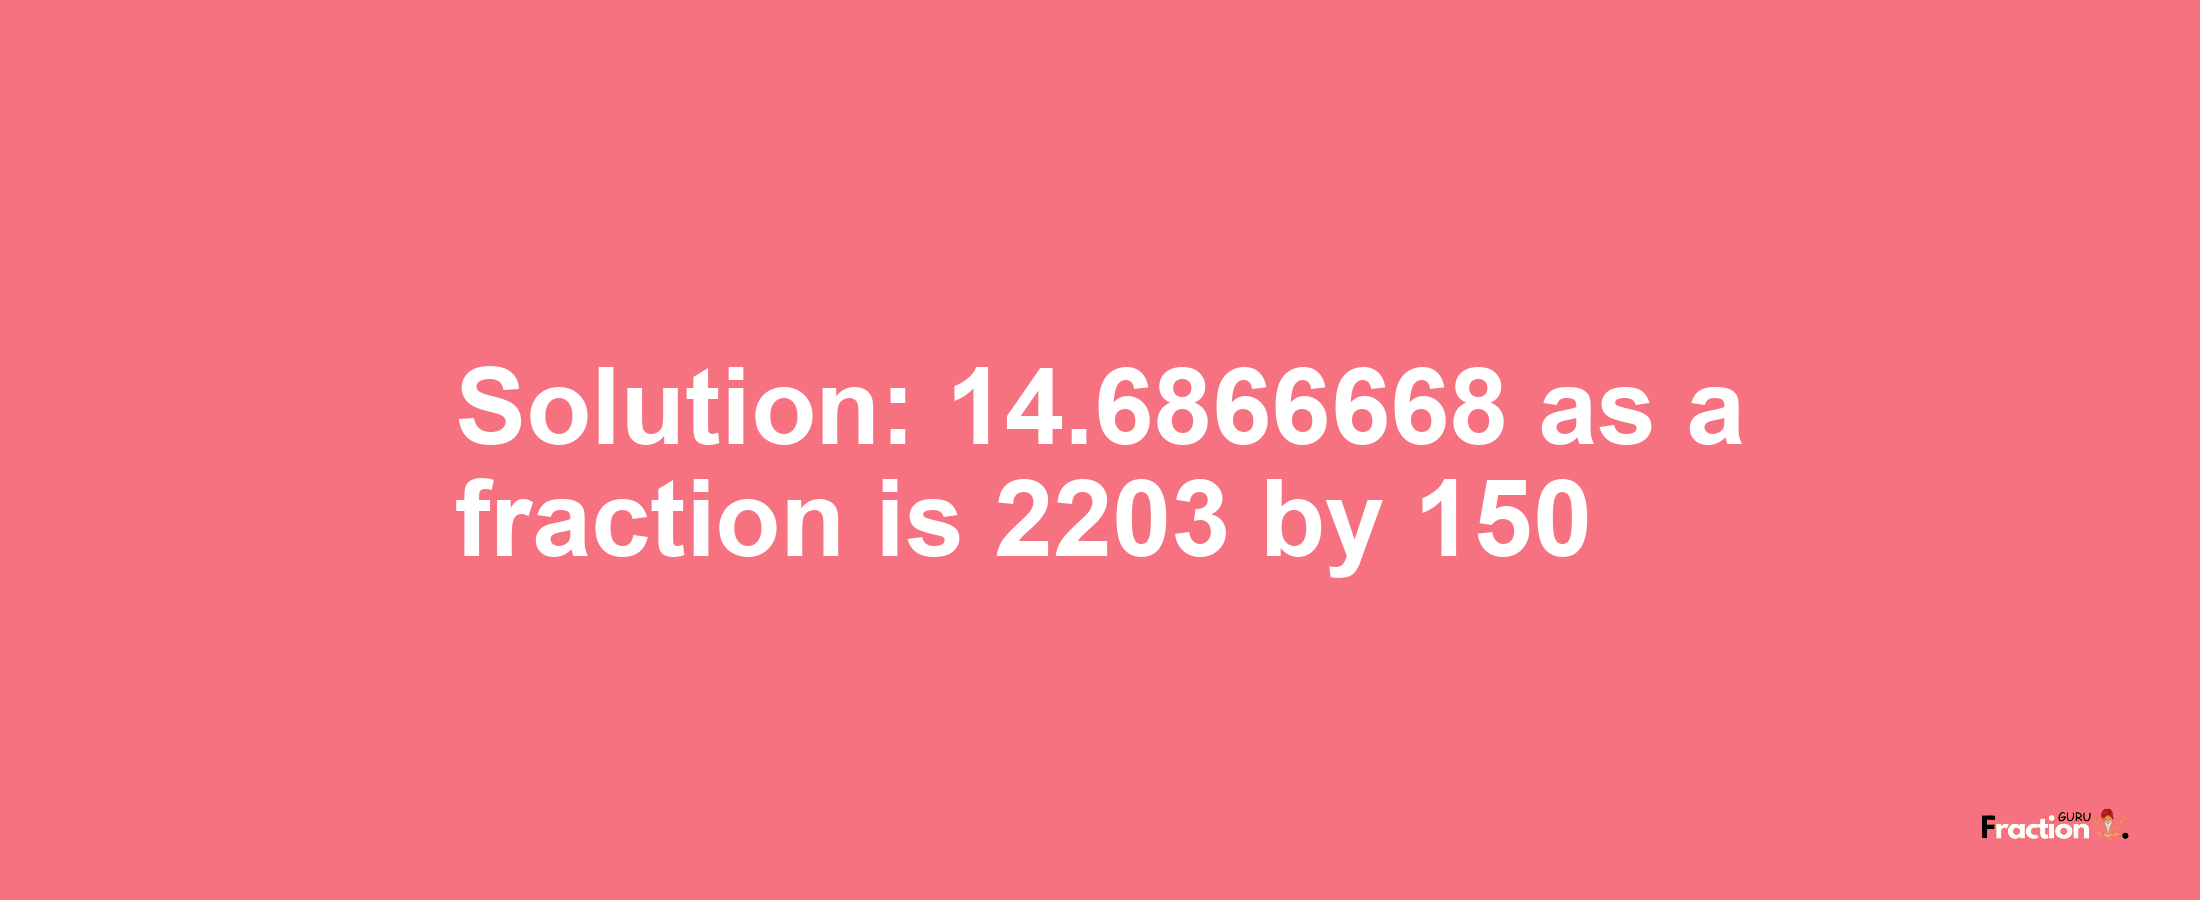 Solution:14.6866668 as a fraction is 2203/150